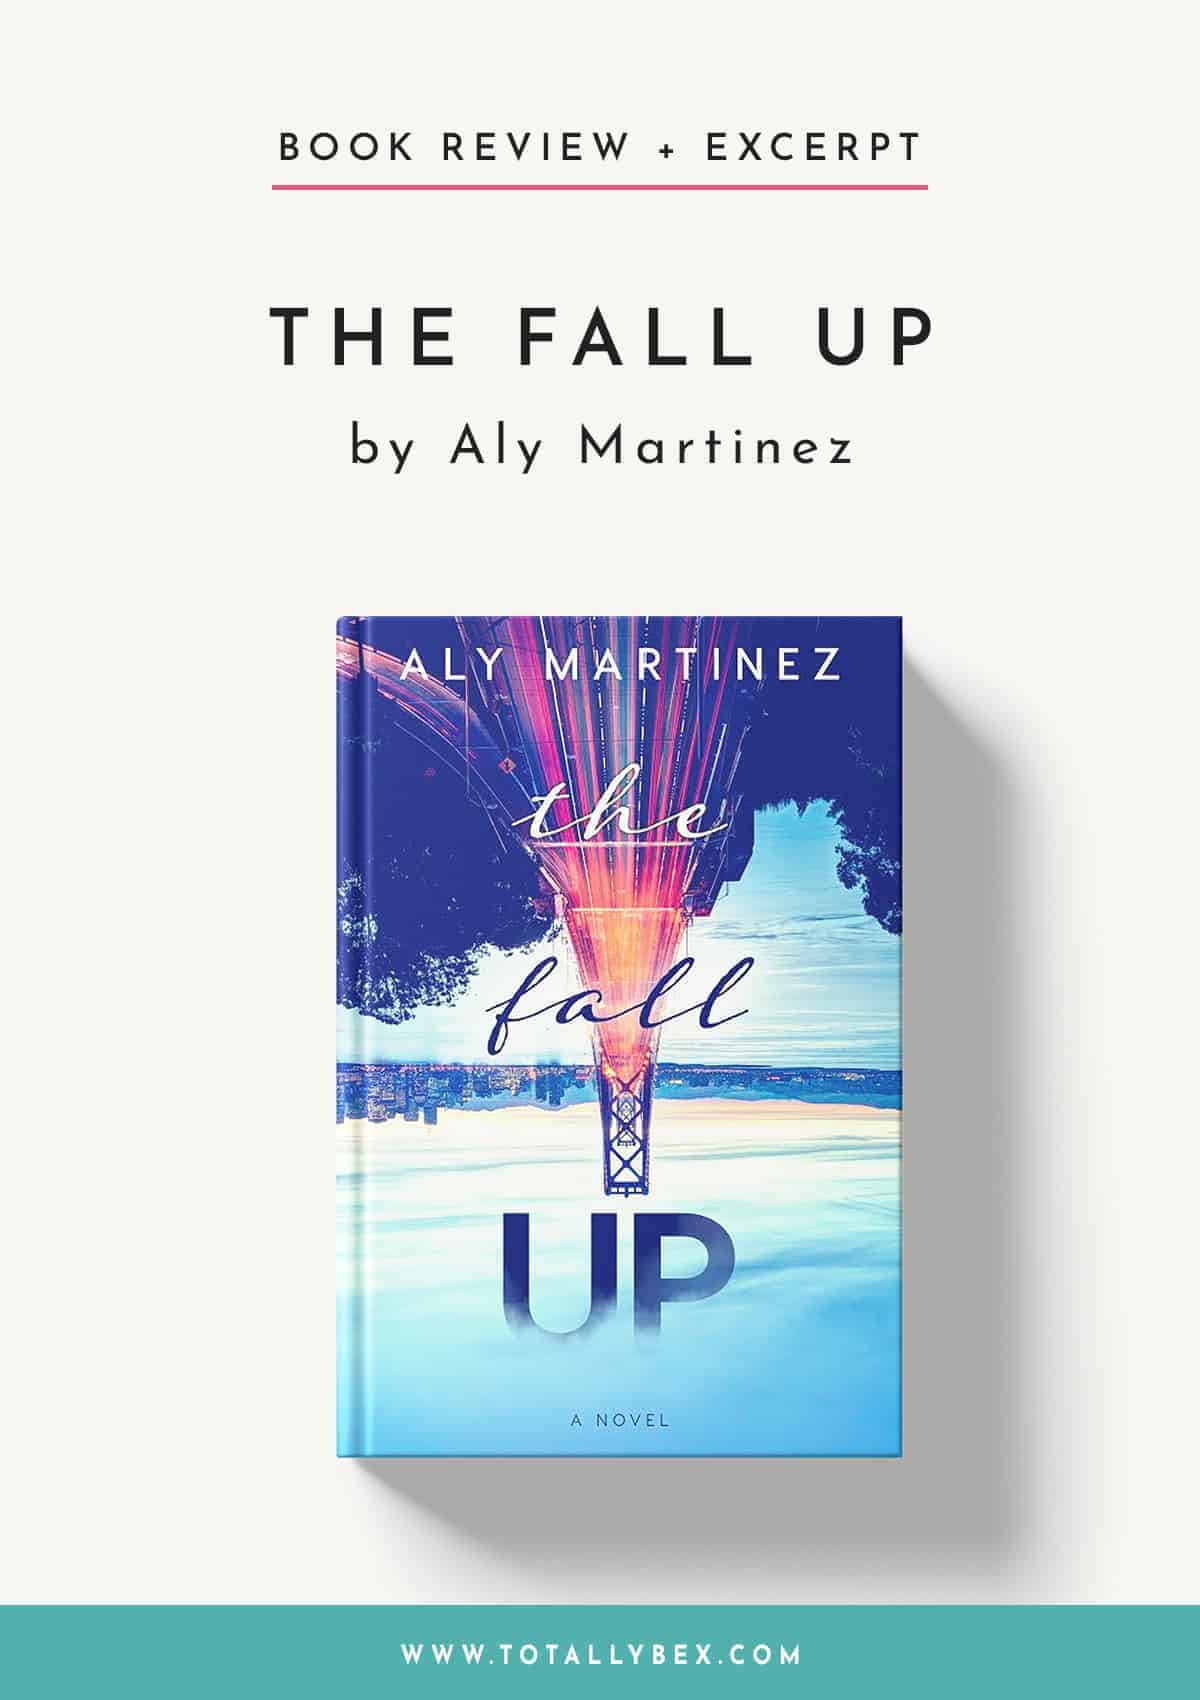 The Fall Up by Aly Martinez – My Review + Read Chapter 1